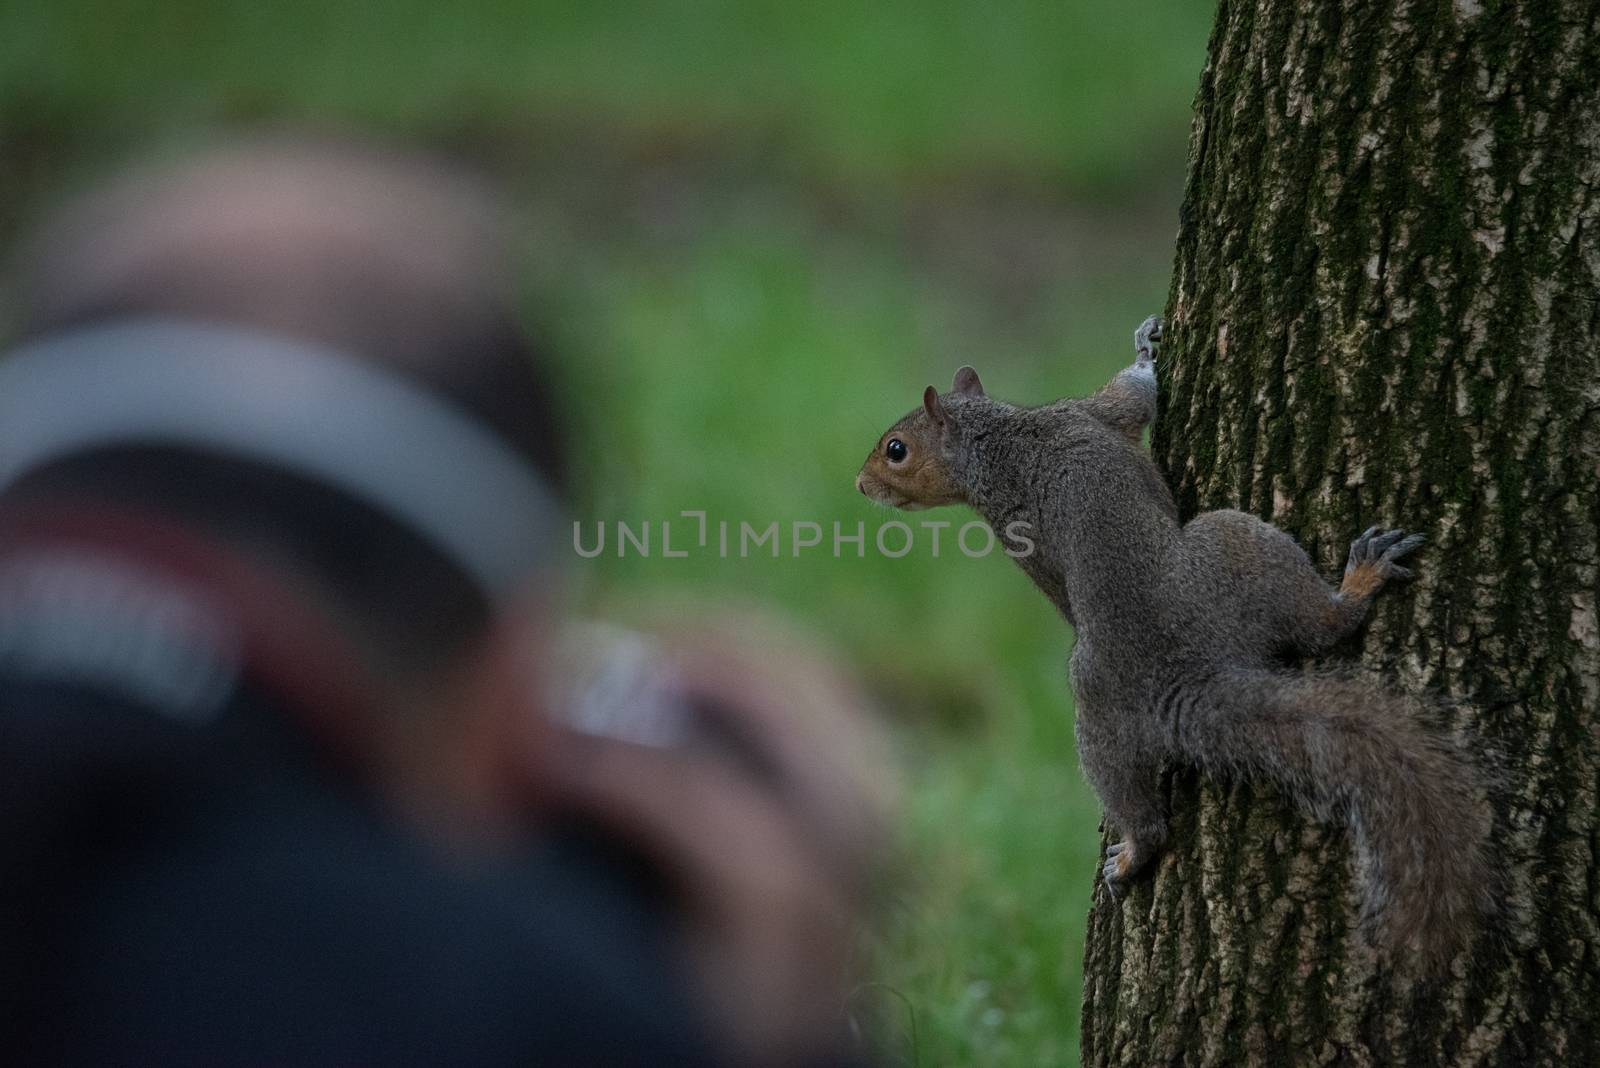 Gray squirrel photographed while climbing a tree trunk in a park